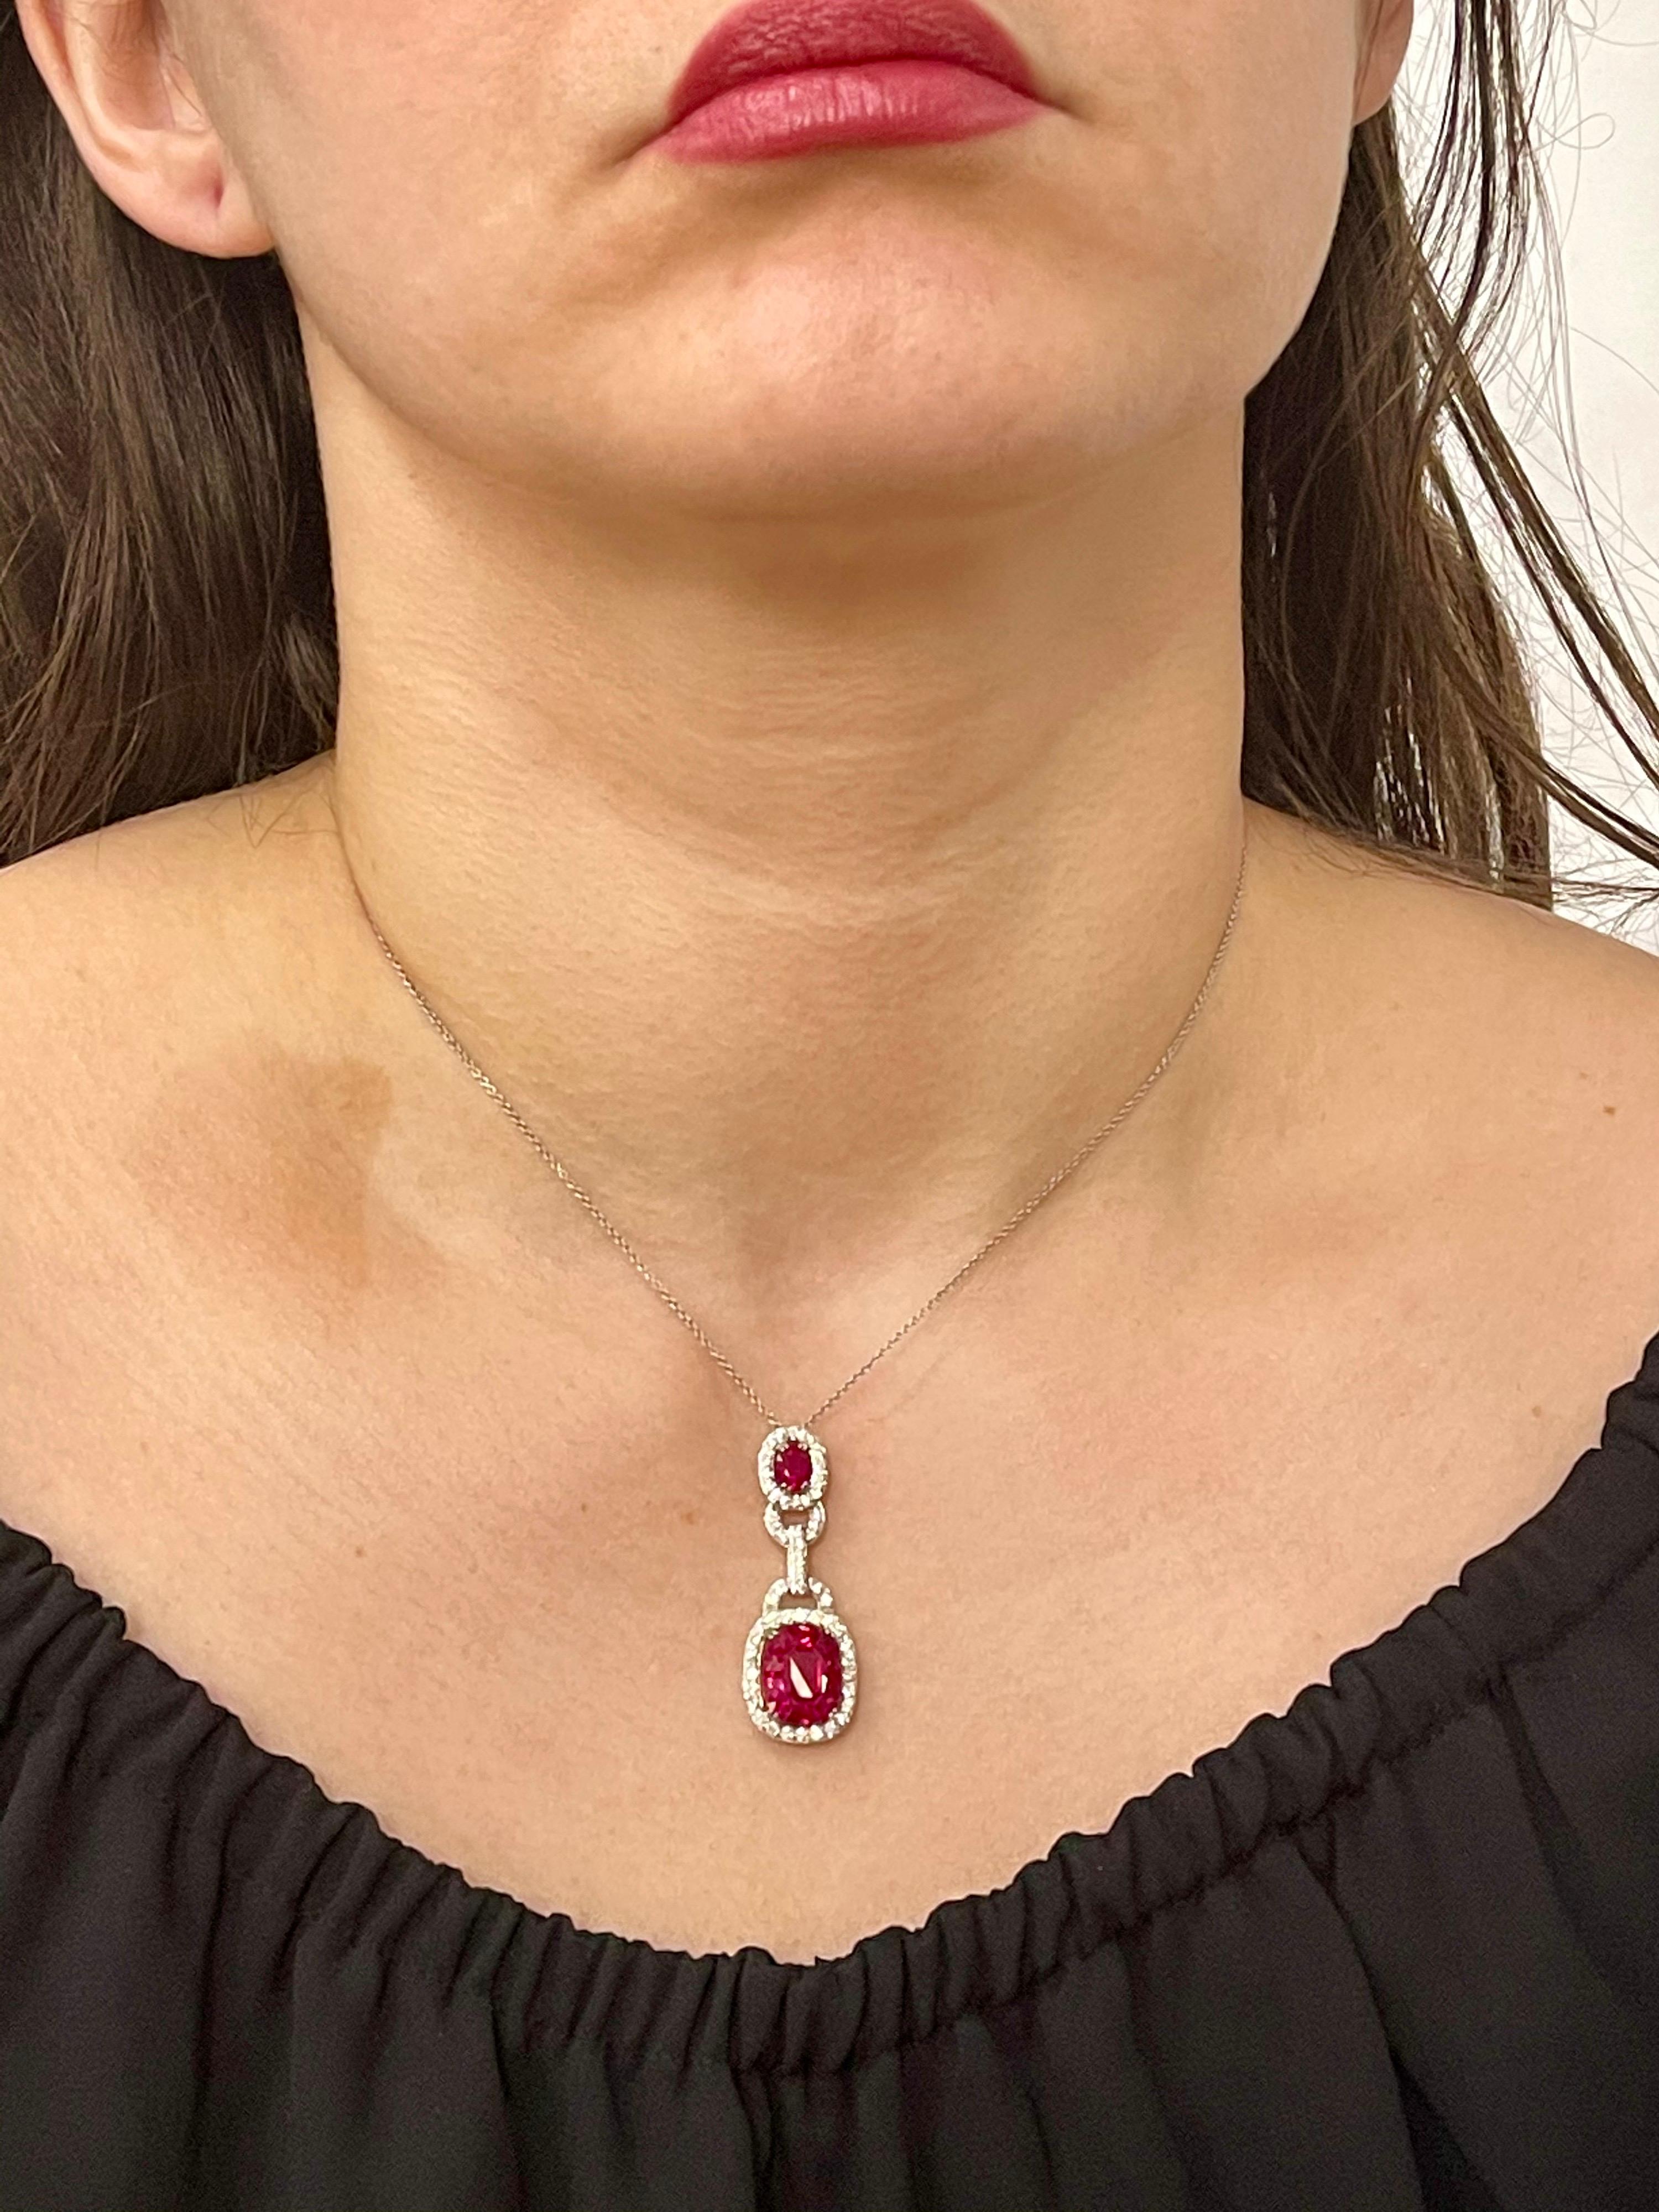 3.5 Carat Natural Burma Ruby and Diamond Pendant or Necklace in 18 Karat Gold For Sale 8